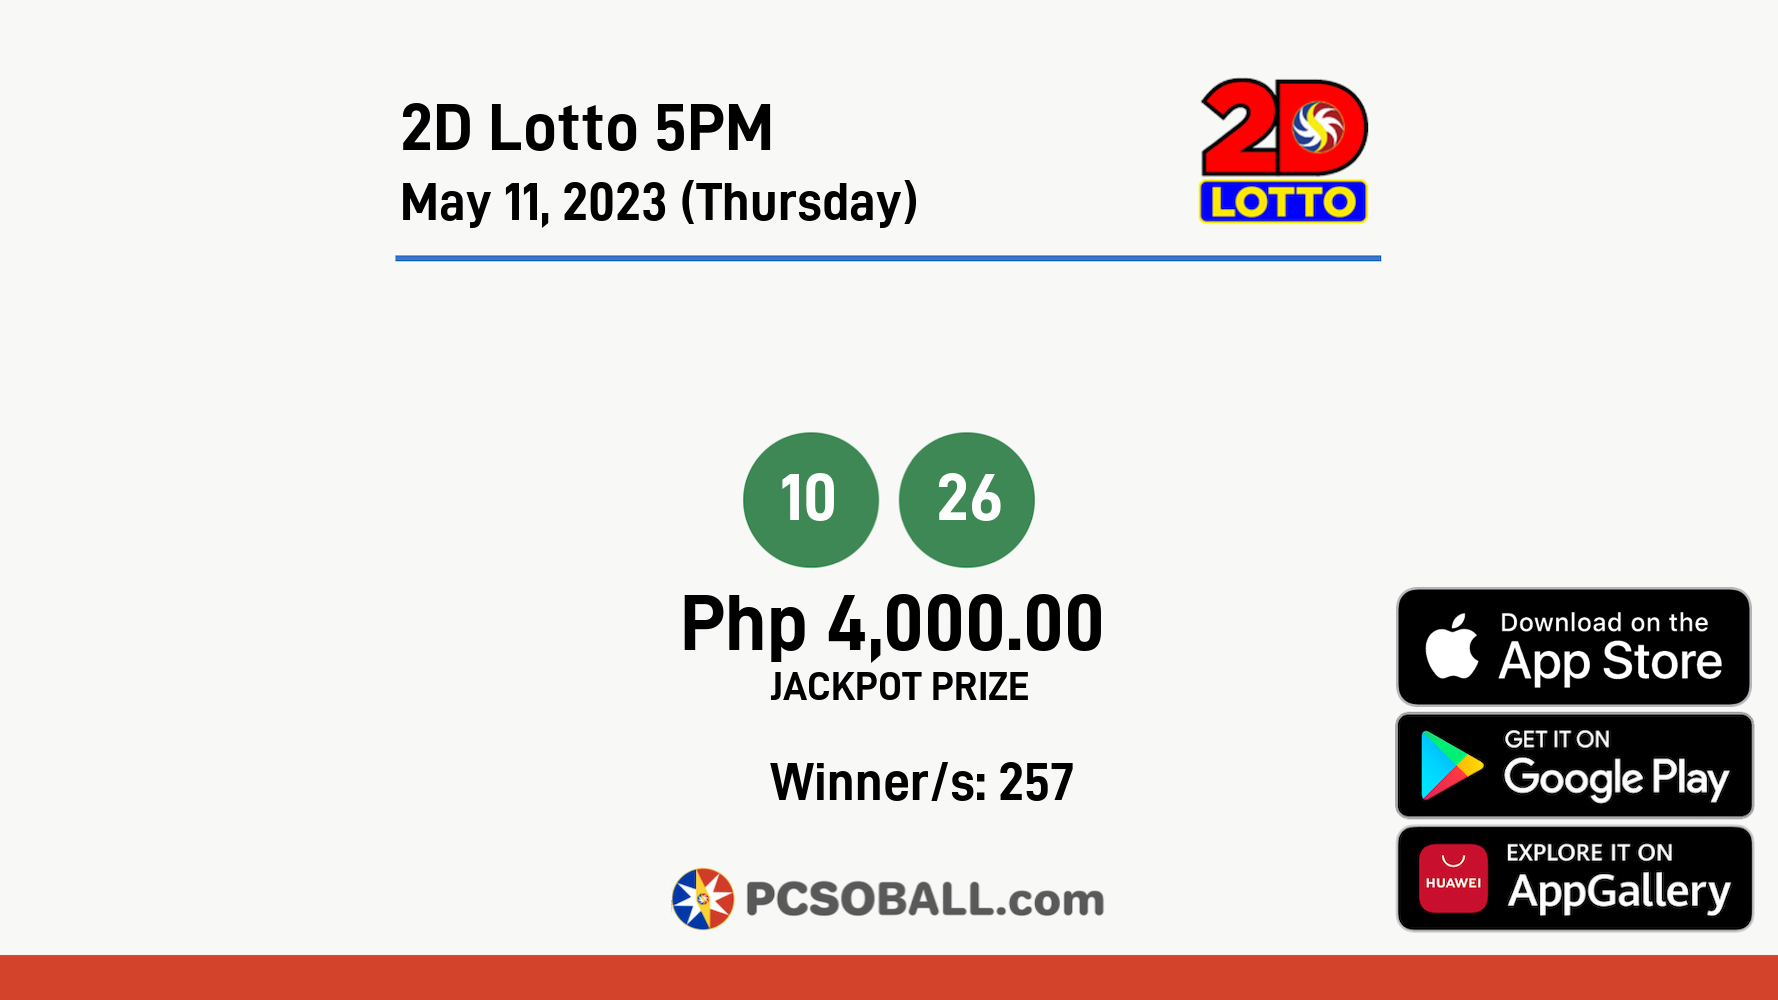 2D Lotto 5PM May 11, 2023 (Thursday) Result